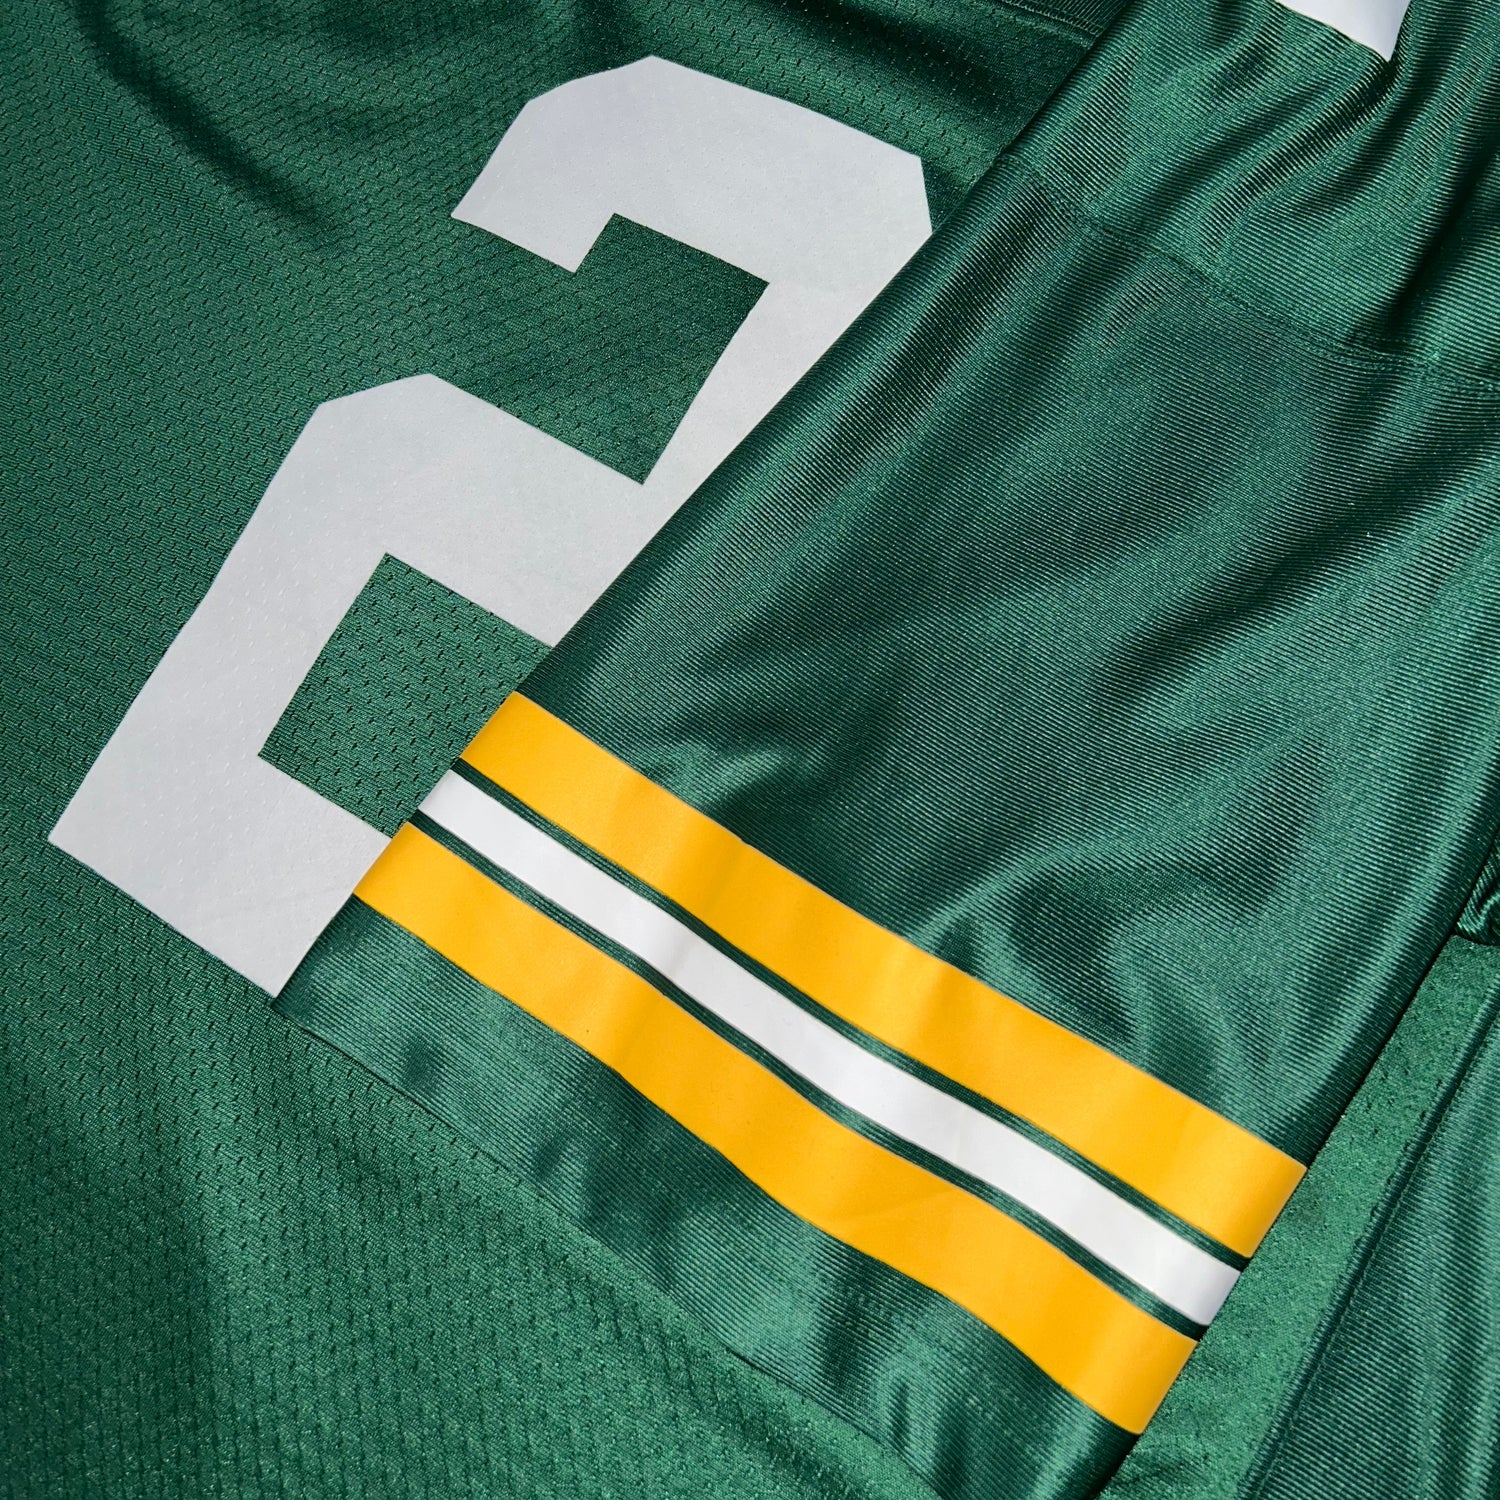 Jersey Green Bay Packers NFL PRO LINE  (XL)